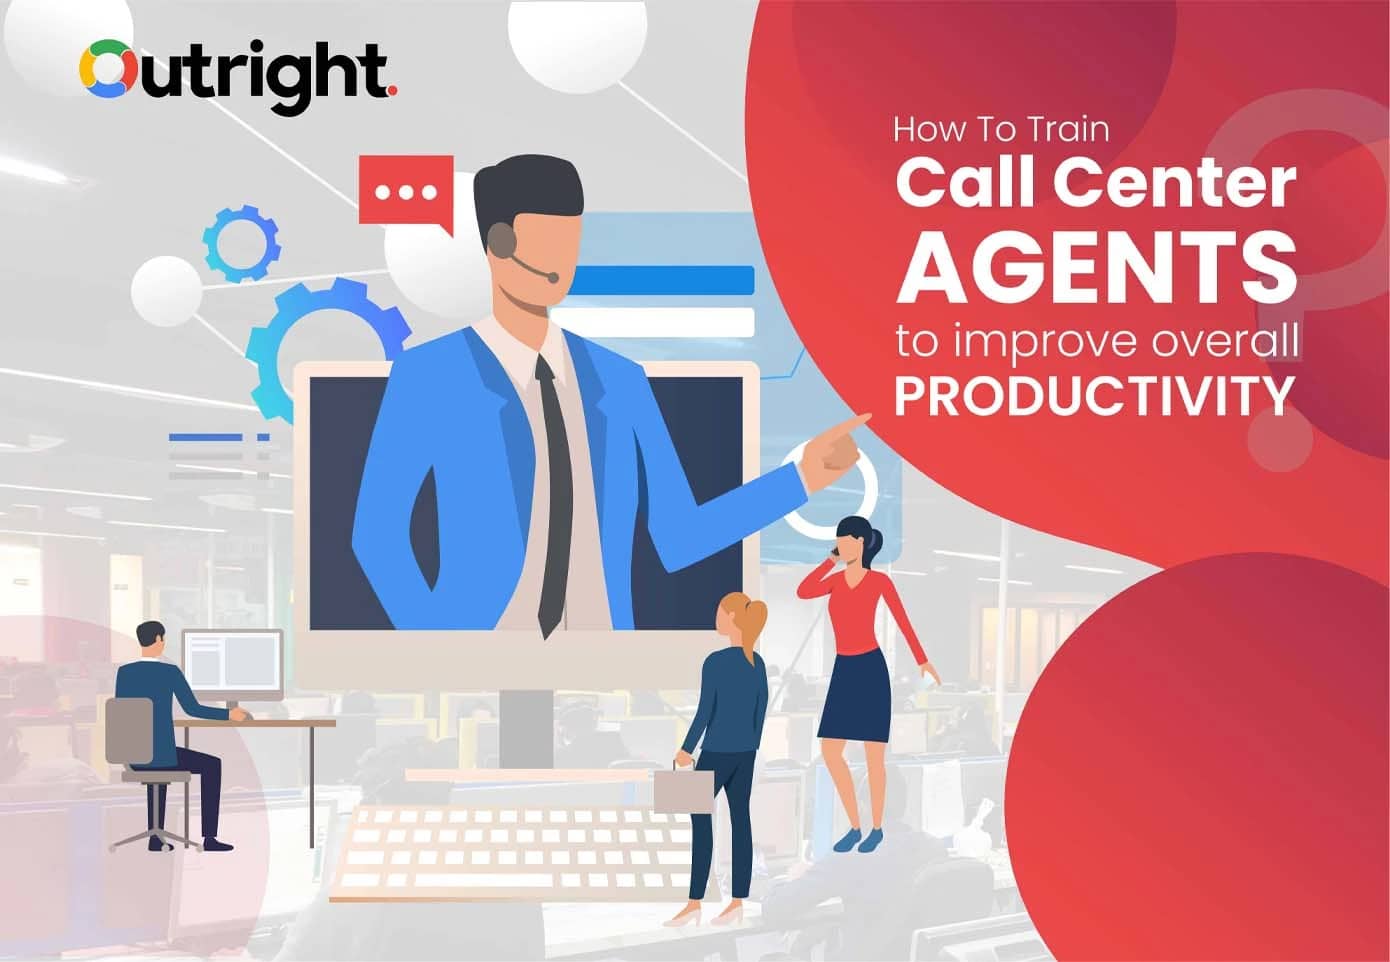 How to train call center agents to improve overall productivity